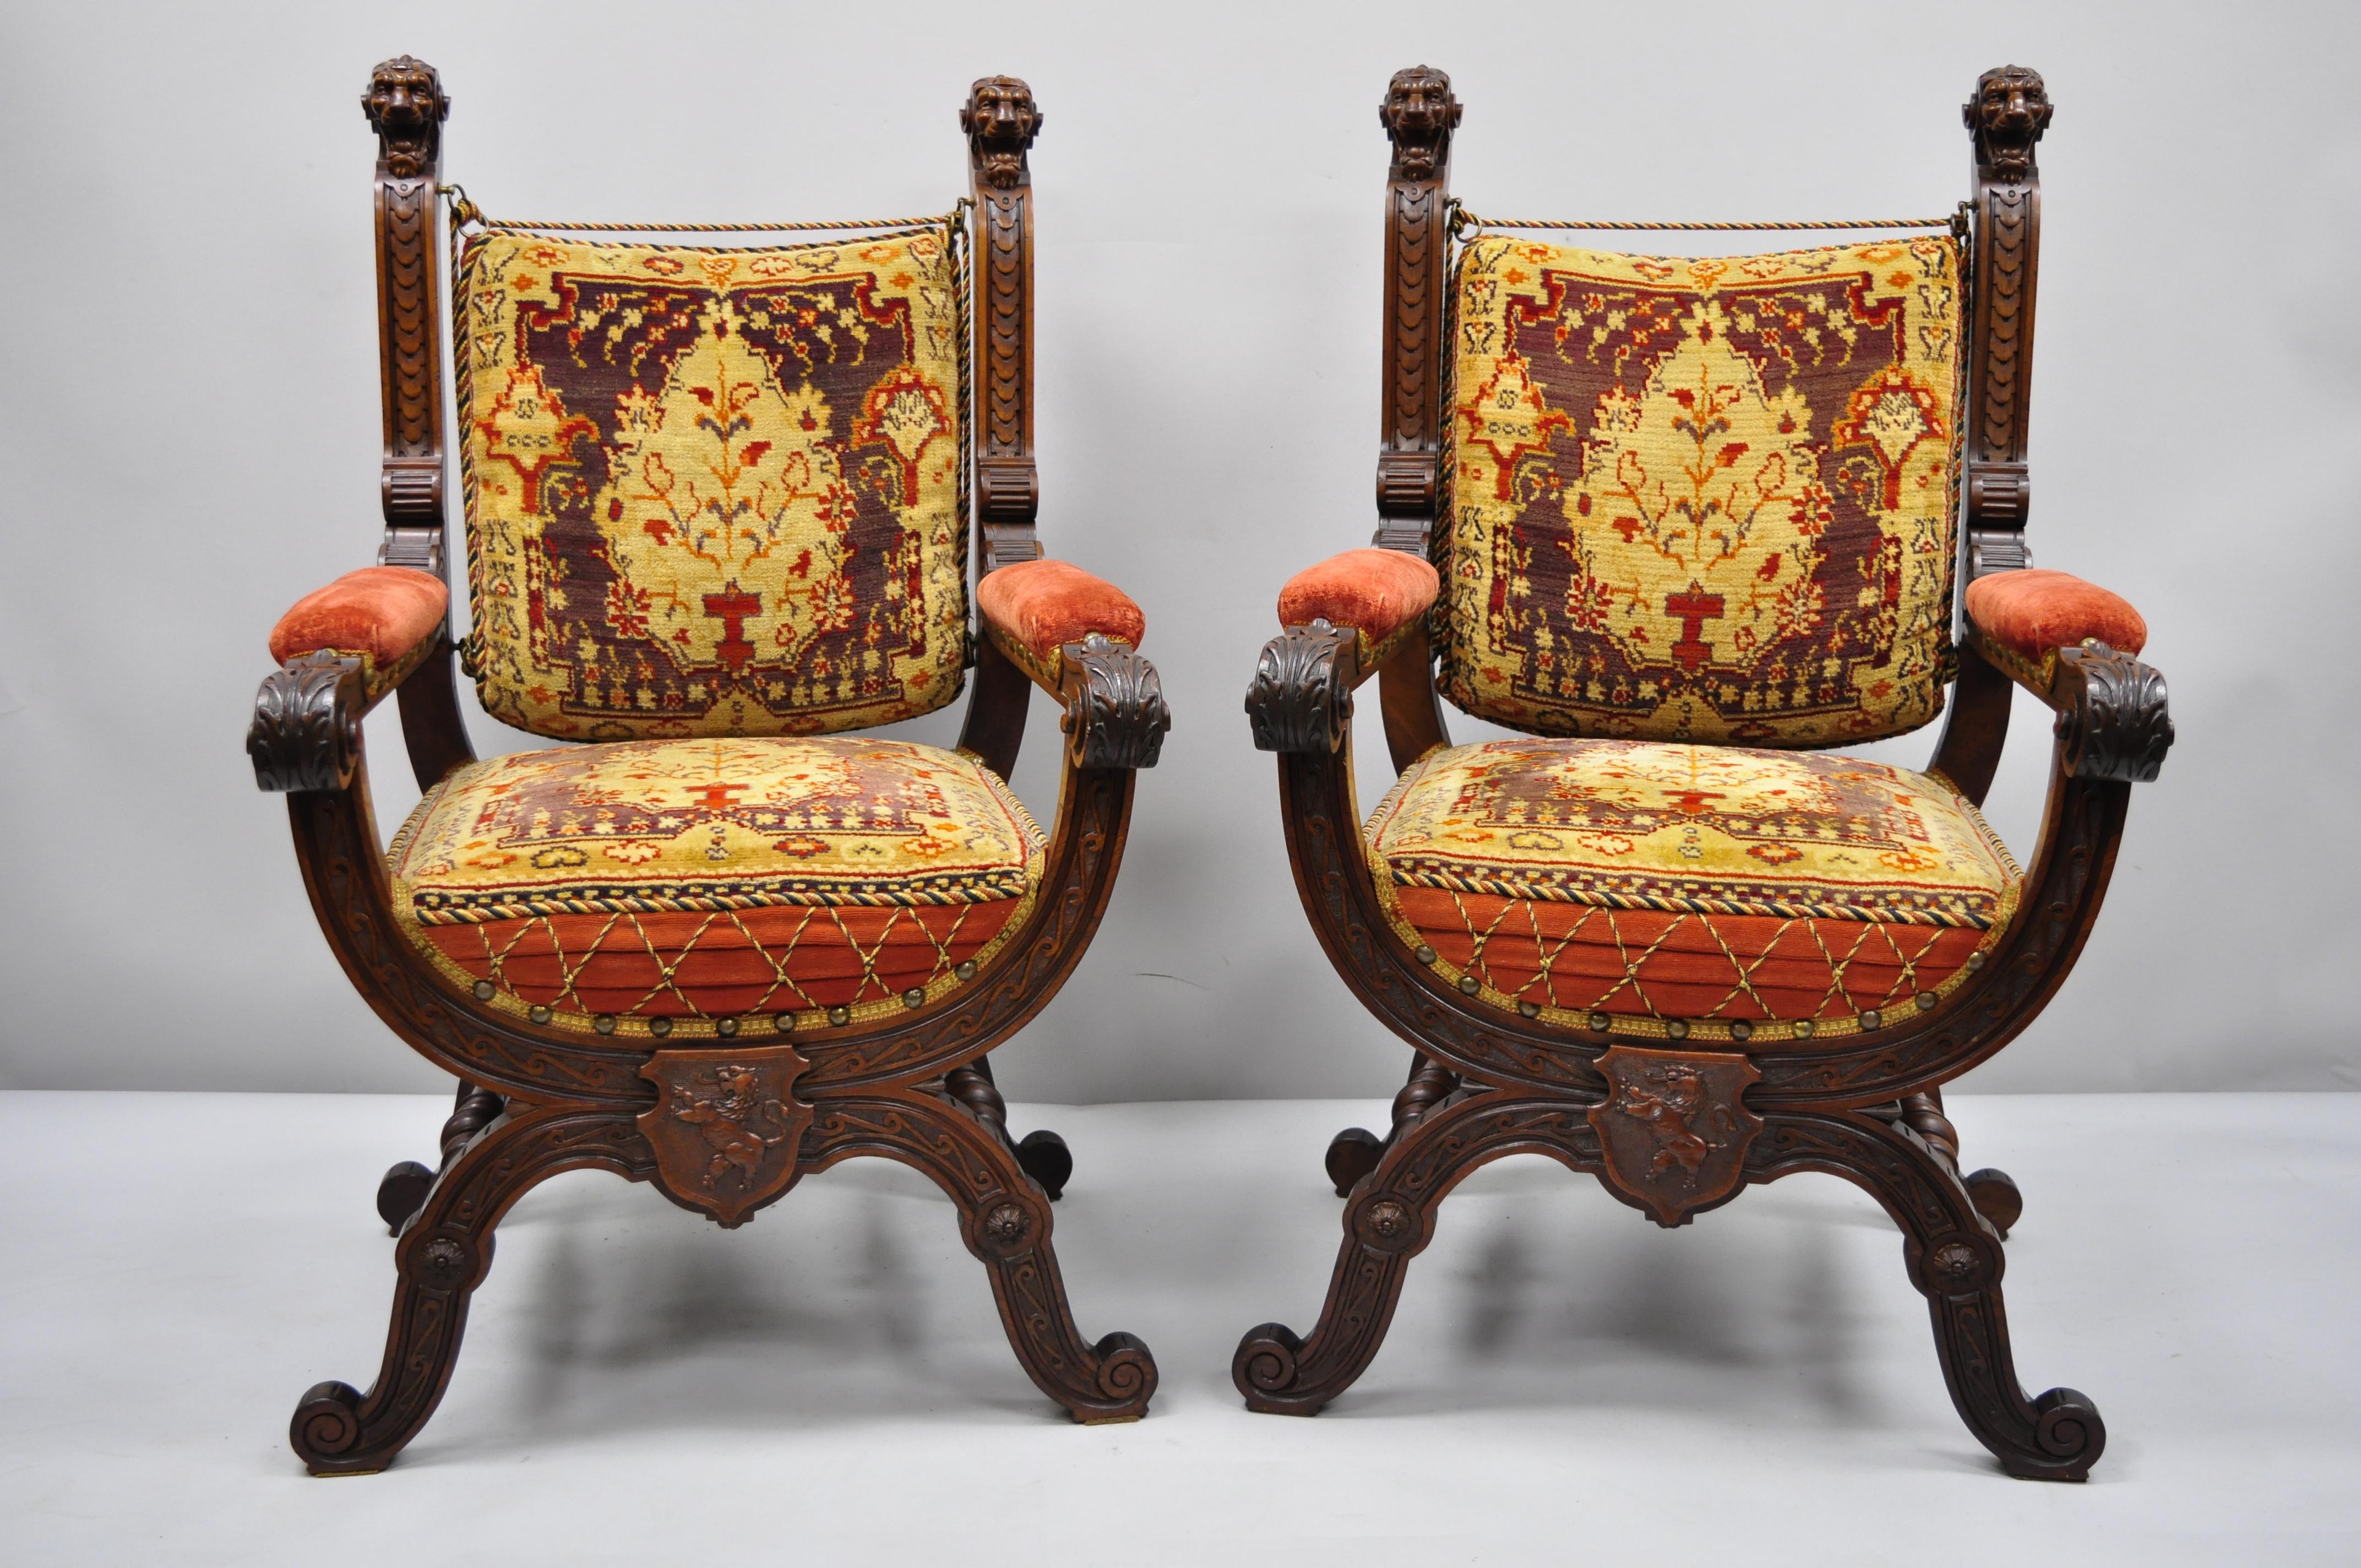 Pair of antique Italian Renaissance Savonarola throne armchairs with lion heads. Item remarkable lion head finials, roaring lion lower carved medallion, stunning pillow upholstery which appears to be a thick carpet like wool fabric, solid wood